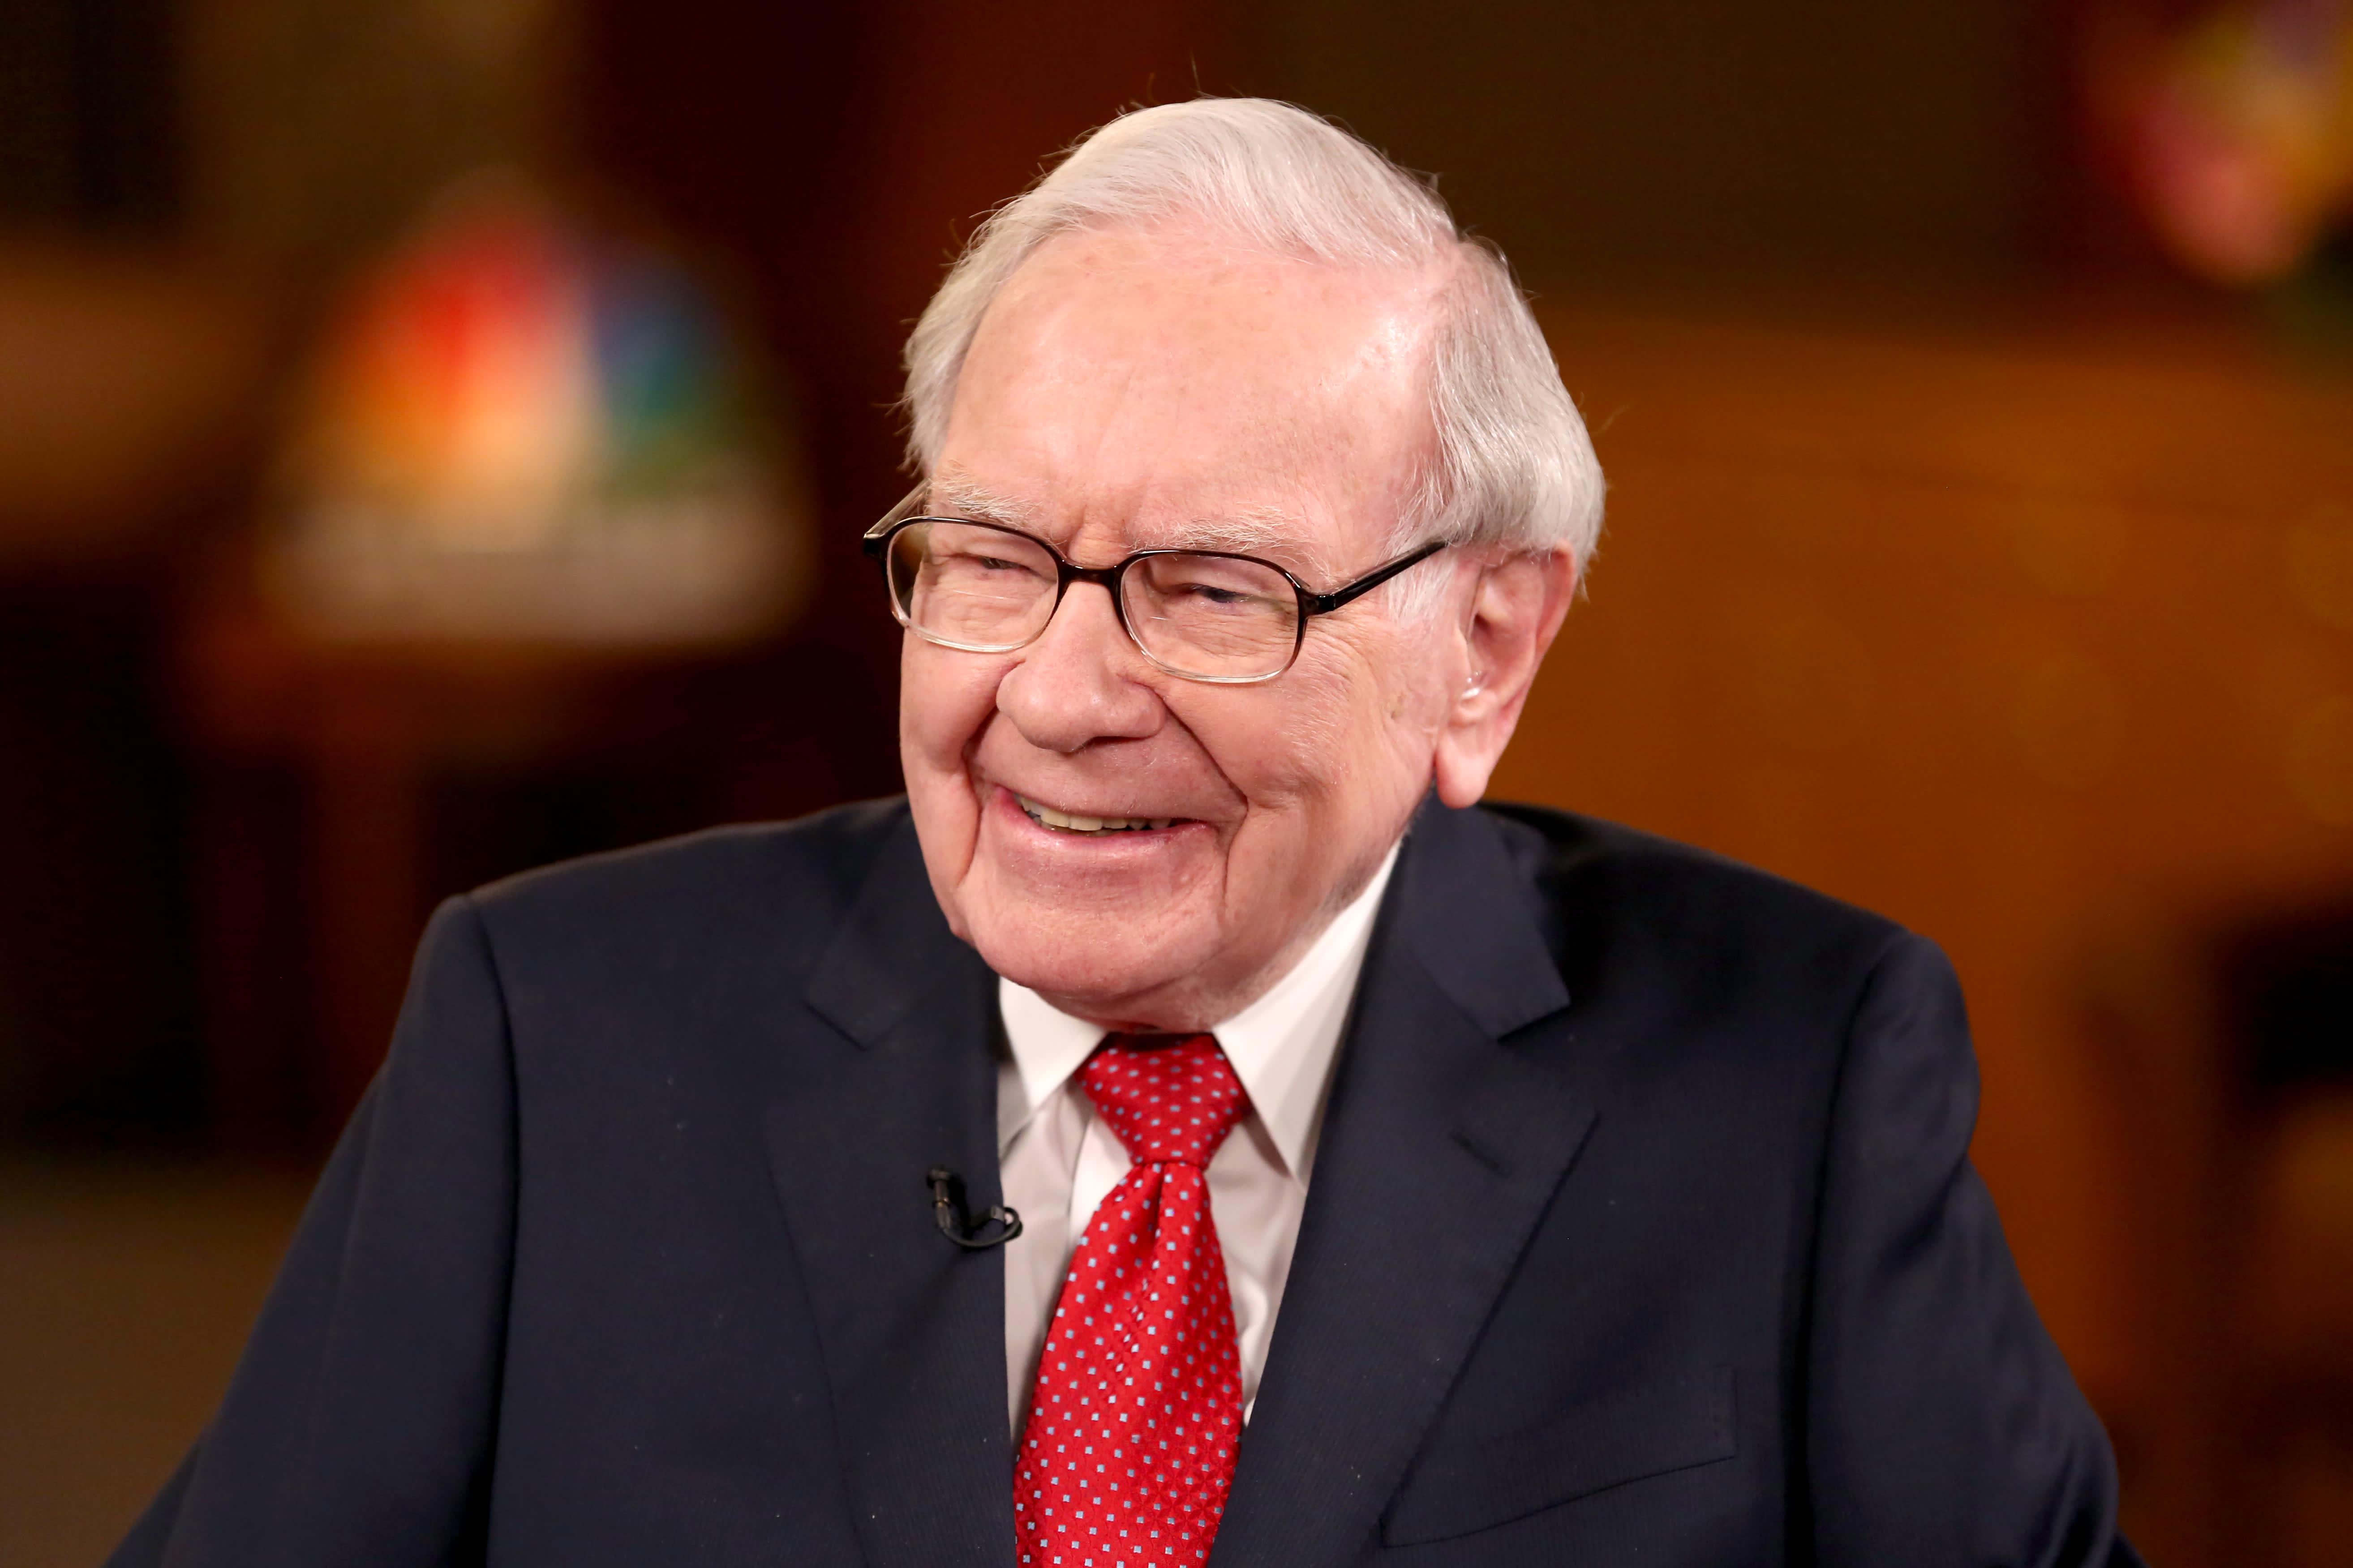 Warren Buffett’s highly anticipated annual letter to Berkshire shareholders arrives on Saturday